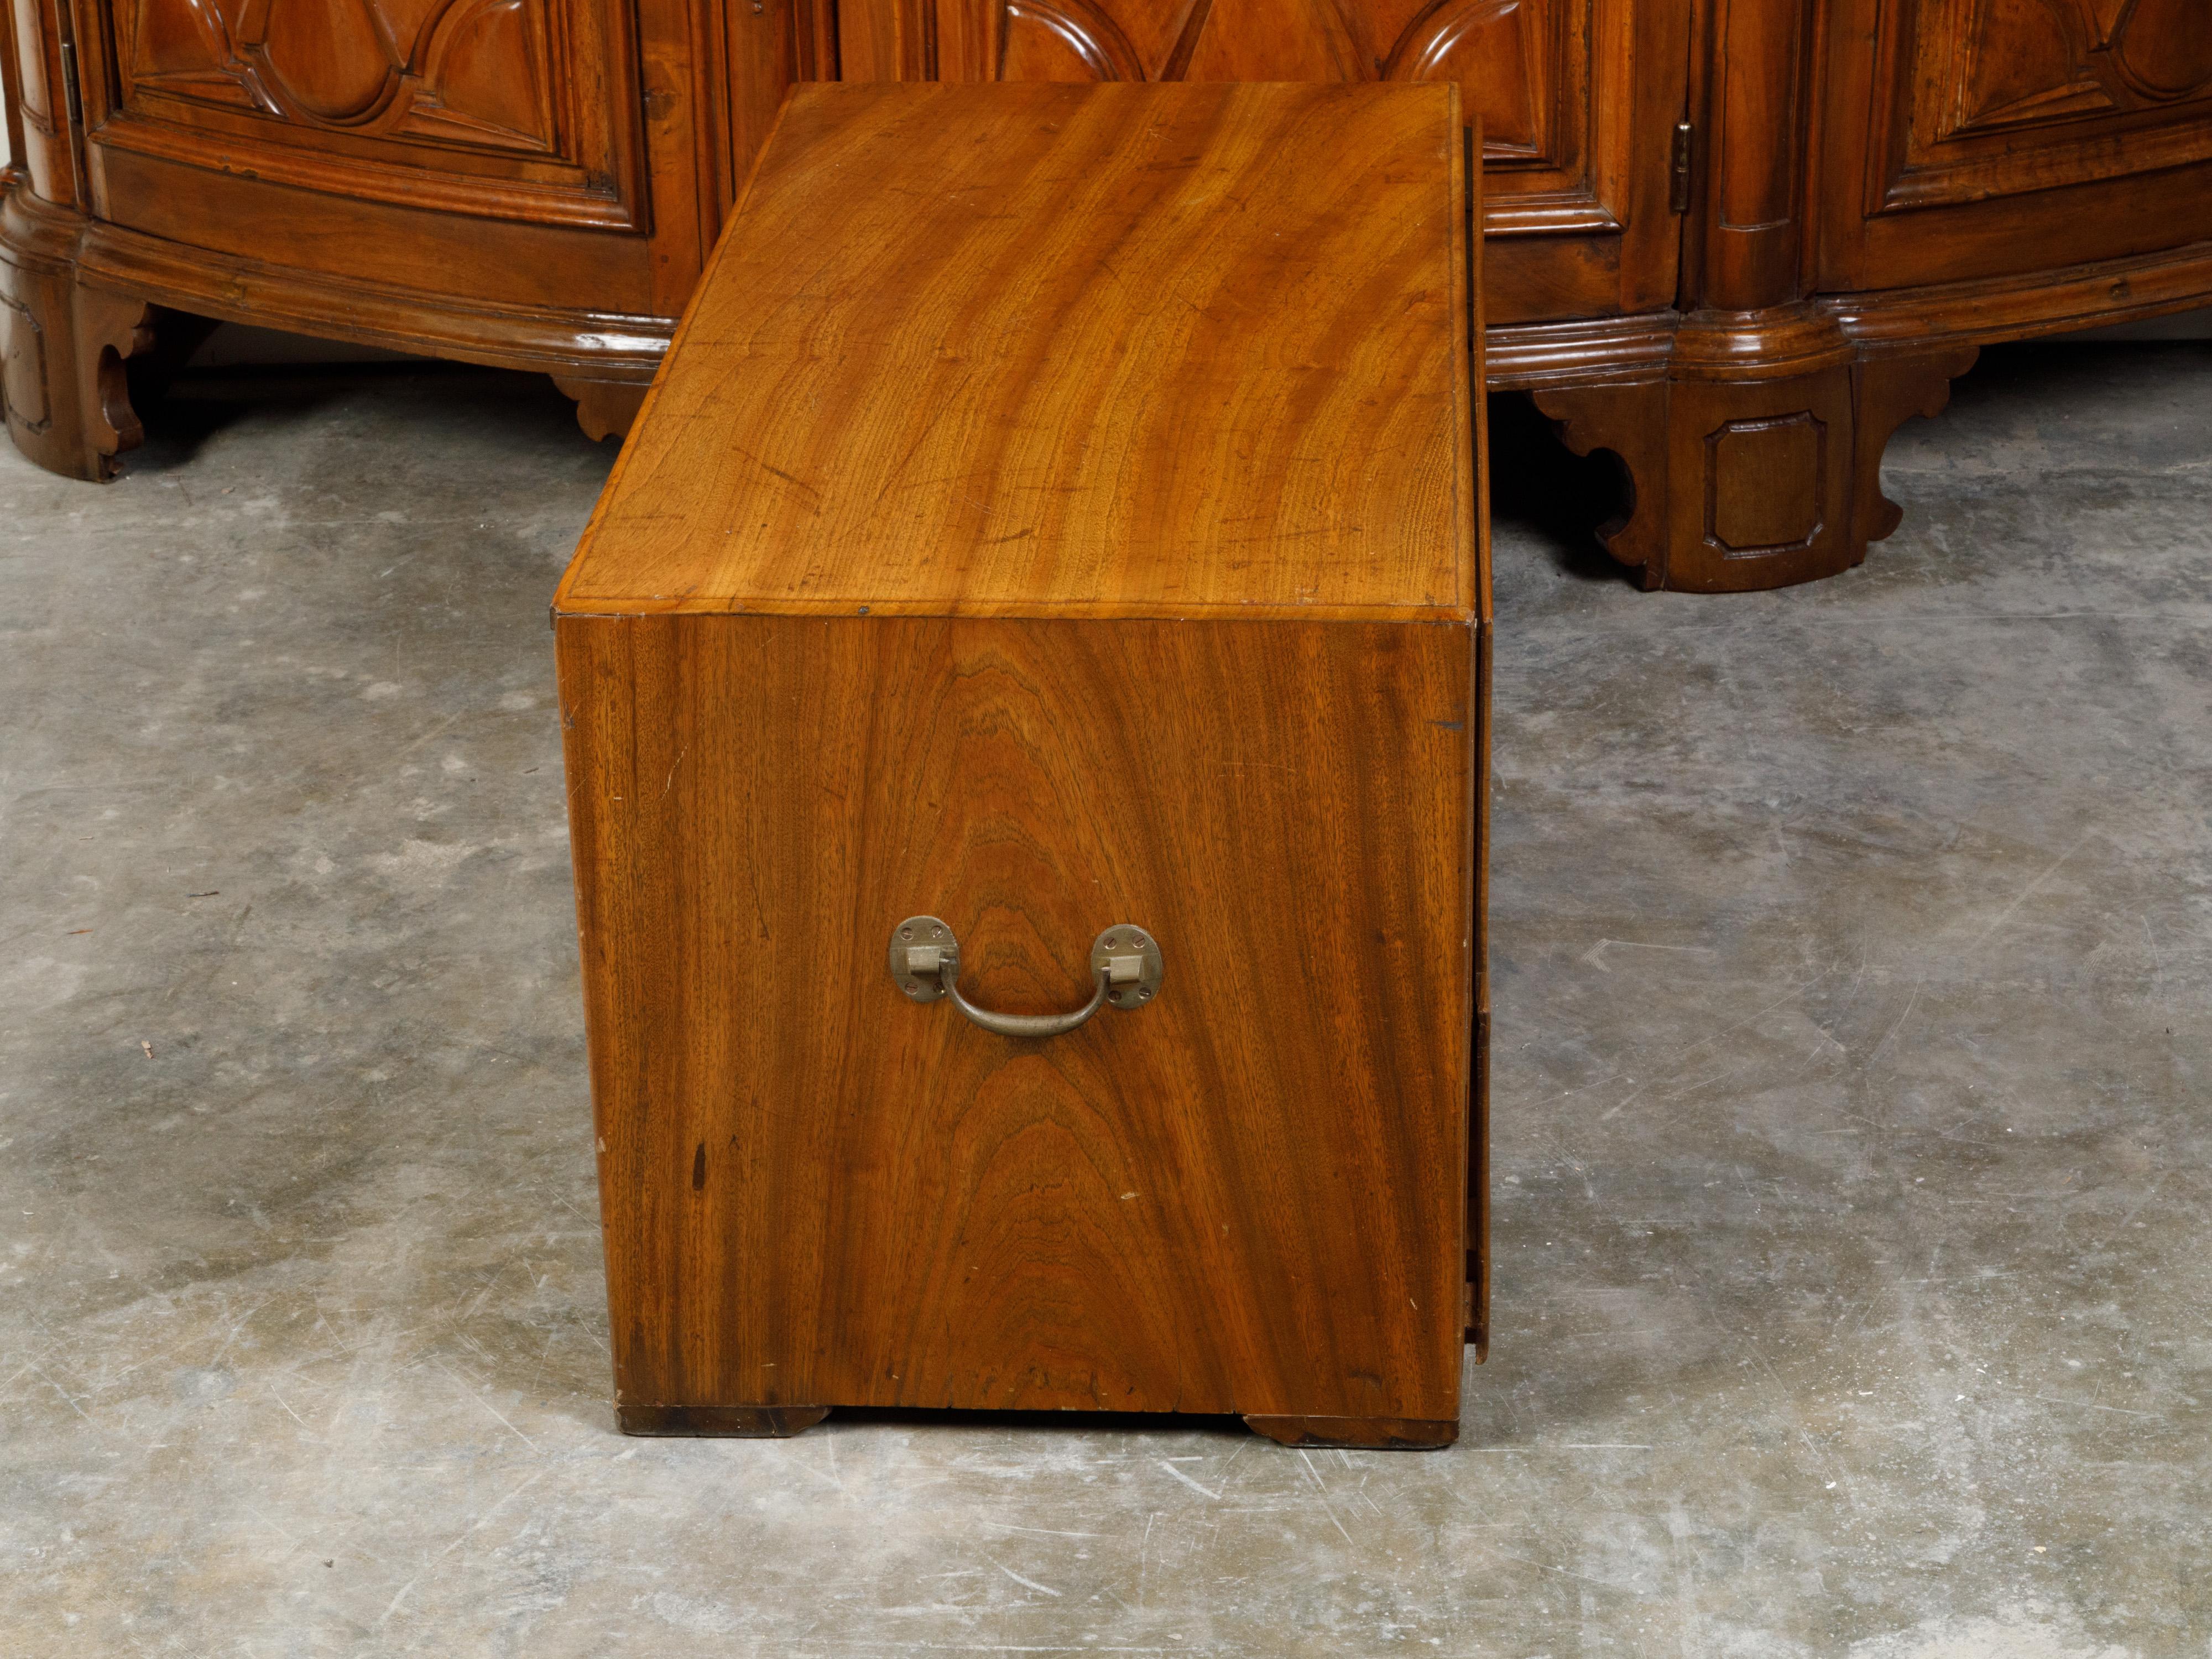 English Campaign 19th Century Camphor Wood Low Chest with Inset Brass Hardware For Sale 4